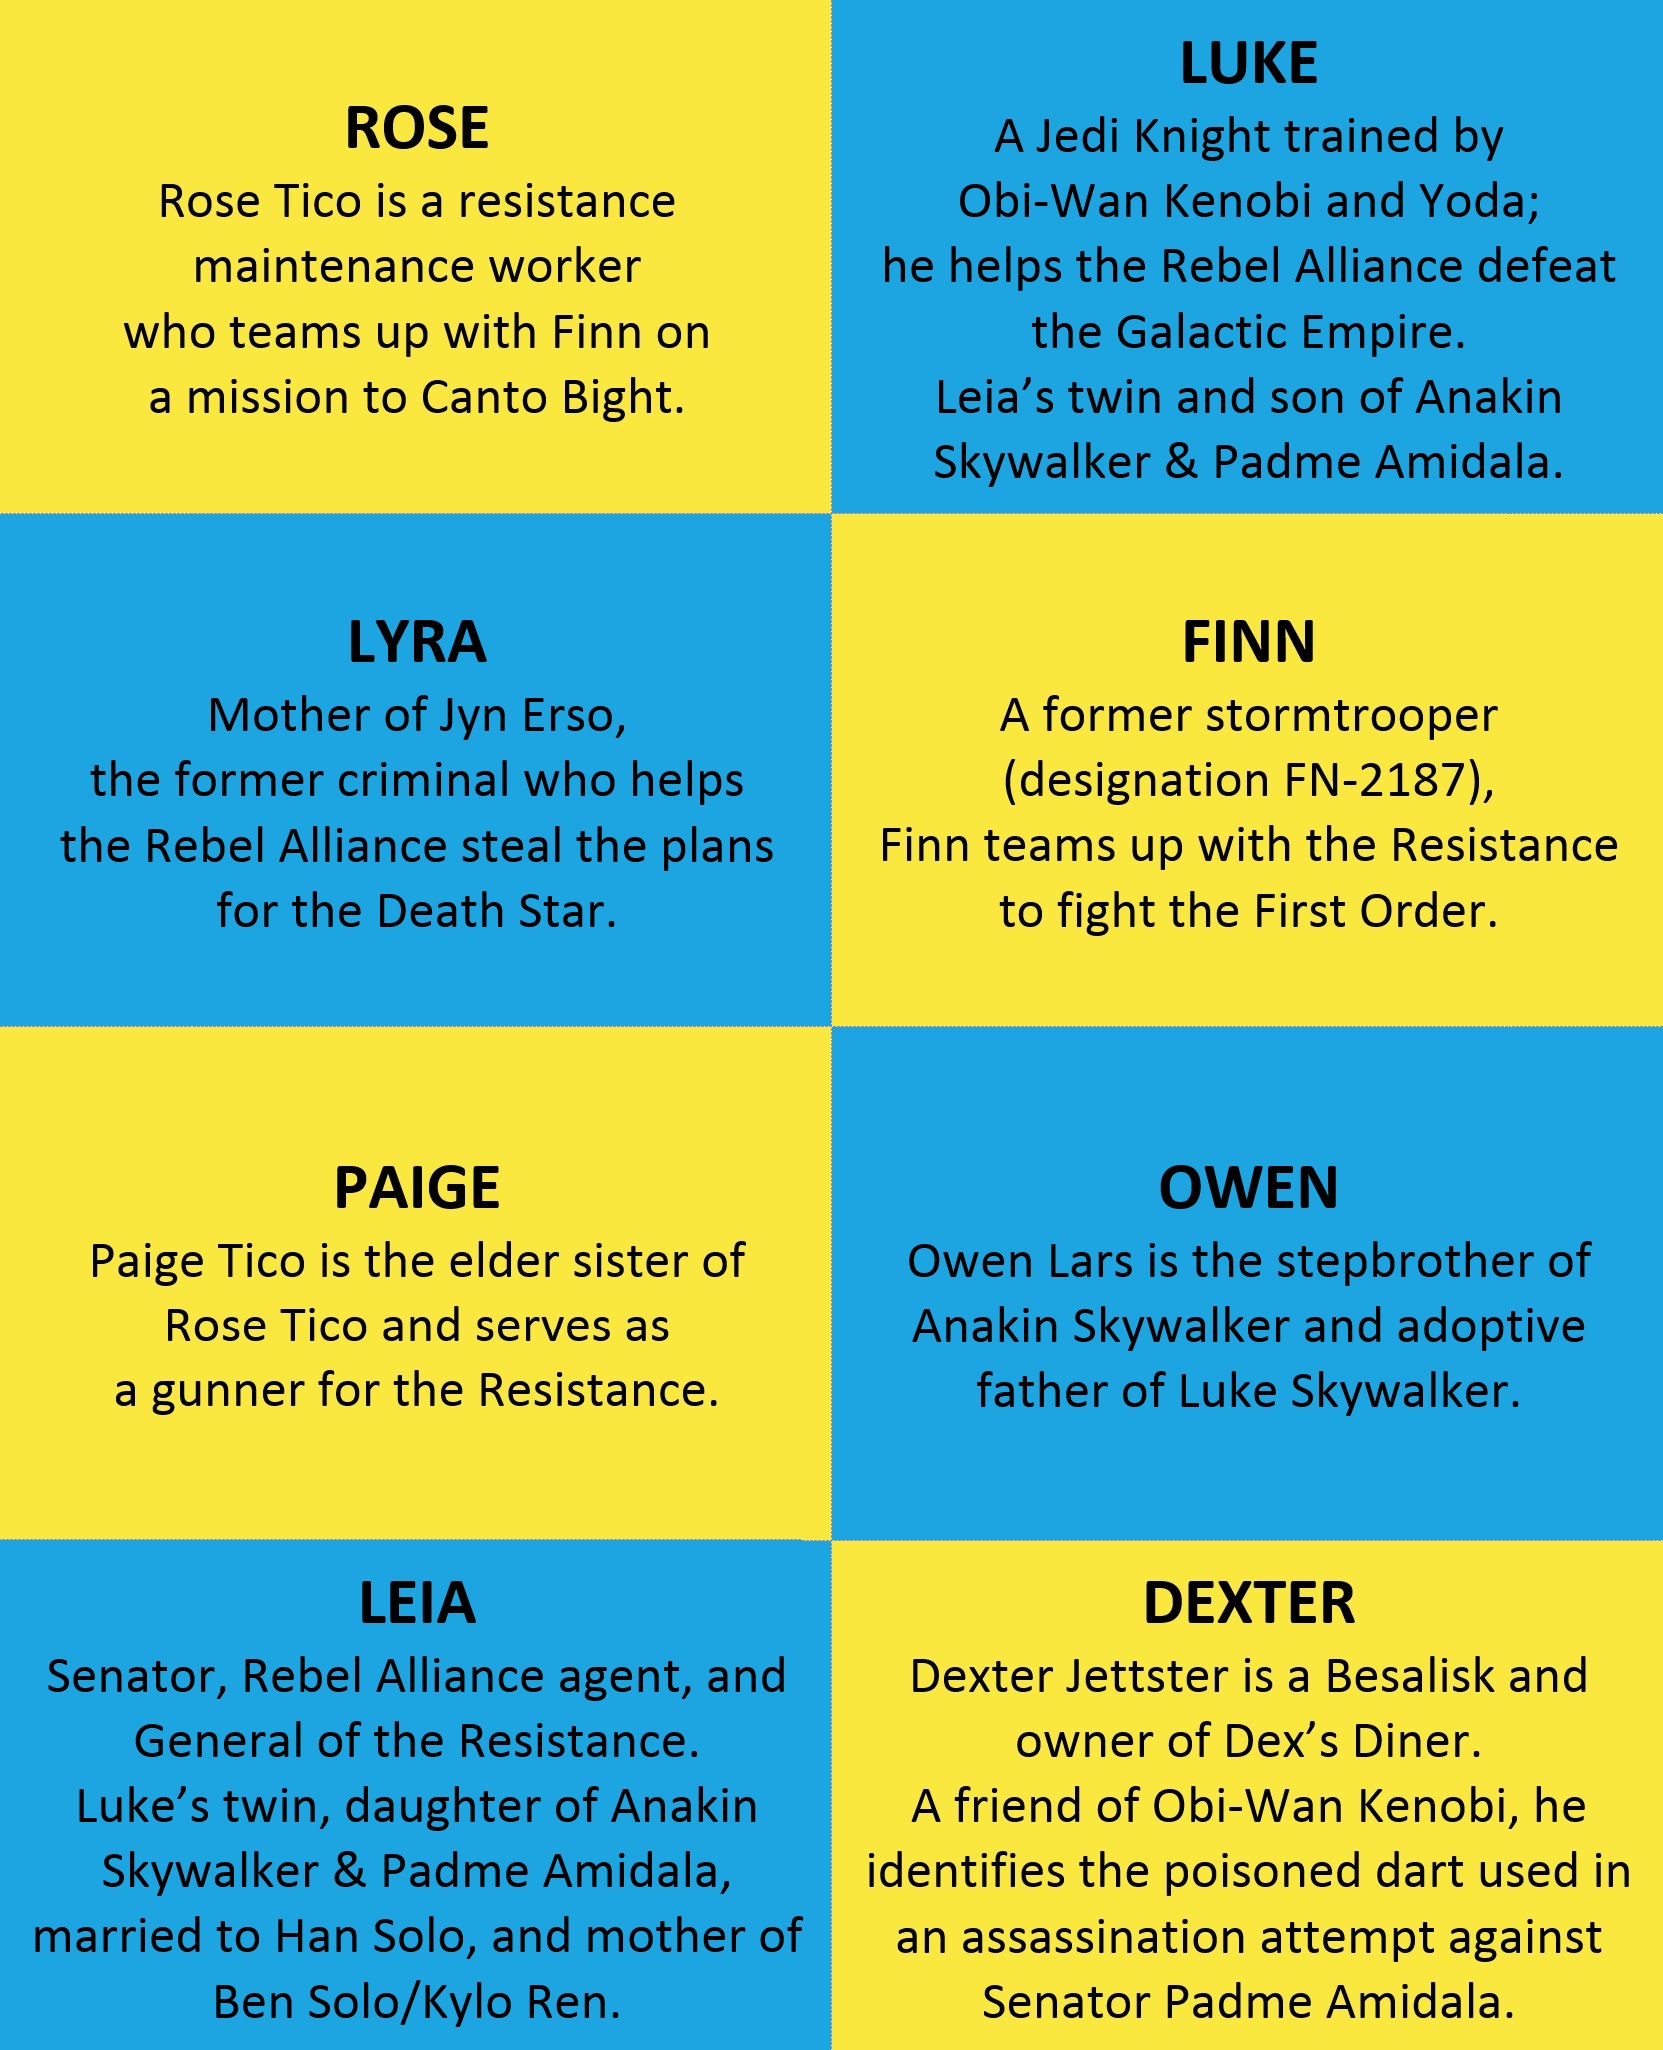 The most popular names from the Star Wars films requested by our customers are listed on a blue and yellow background. Each square features a name and a description of the character with that name. The names are Rose Tico (a Resistance maintenance worker), Luke Skywalker (a Jedi Knight), Lyra (mother of Jyn Erso), Finn (a former stormtrooper who joins the Resistance), Paige Tico (Rose’s sister and a gunner for the Resistance), Owen Lars (Anakin Skywalker’s stepbrother and adoptive father of Luke Skywalker), Leia Organa (General of the Resistance), and Dexter Jettster (a Besalisk who is friends with Obi-Wan Kenobi).